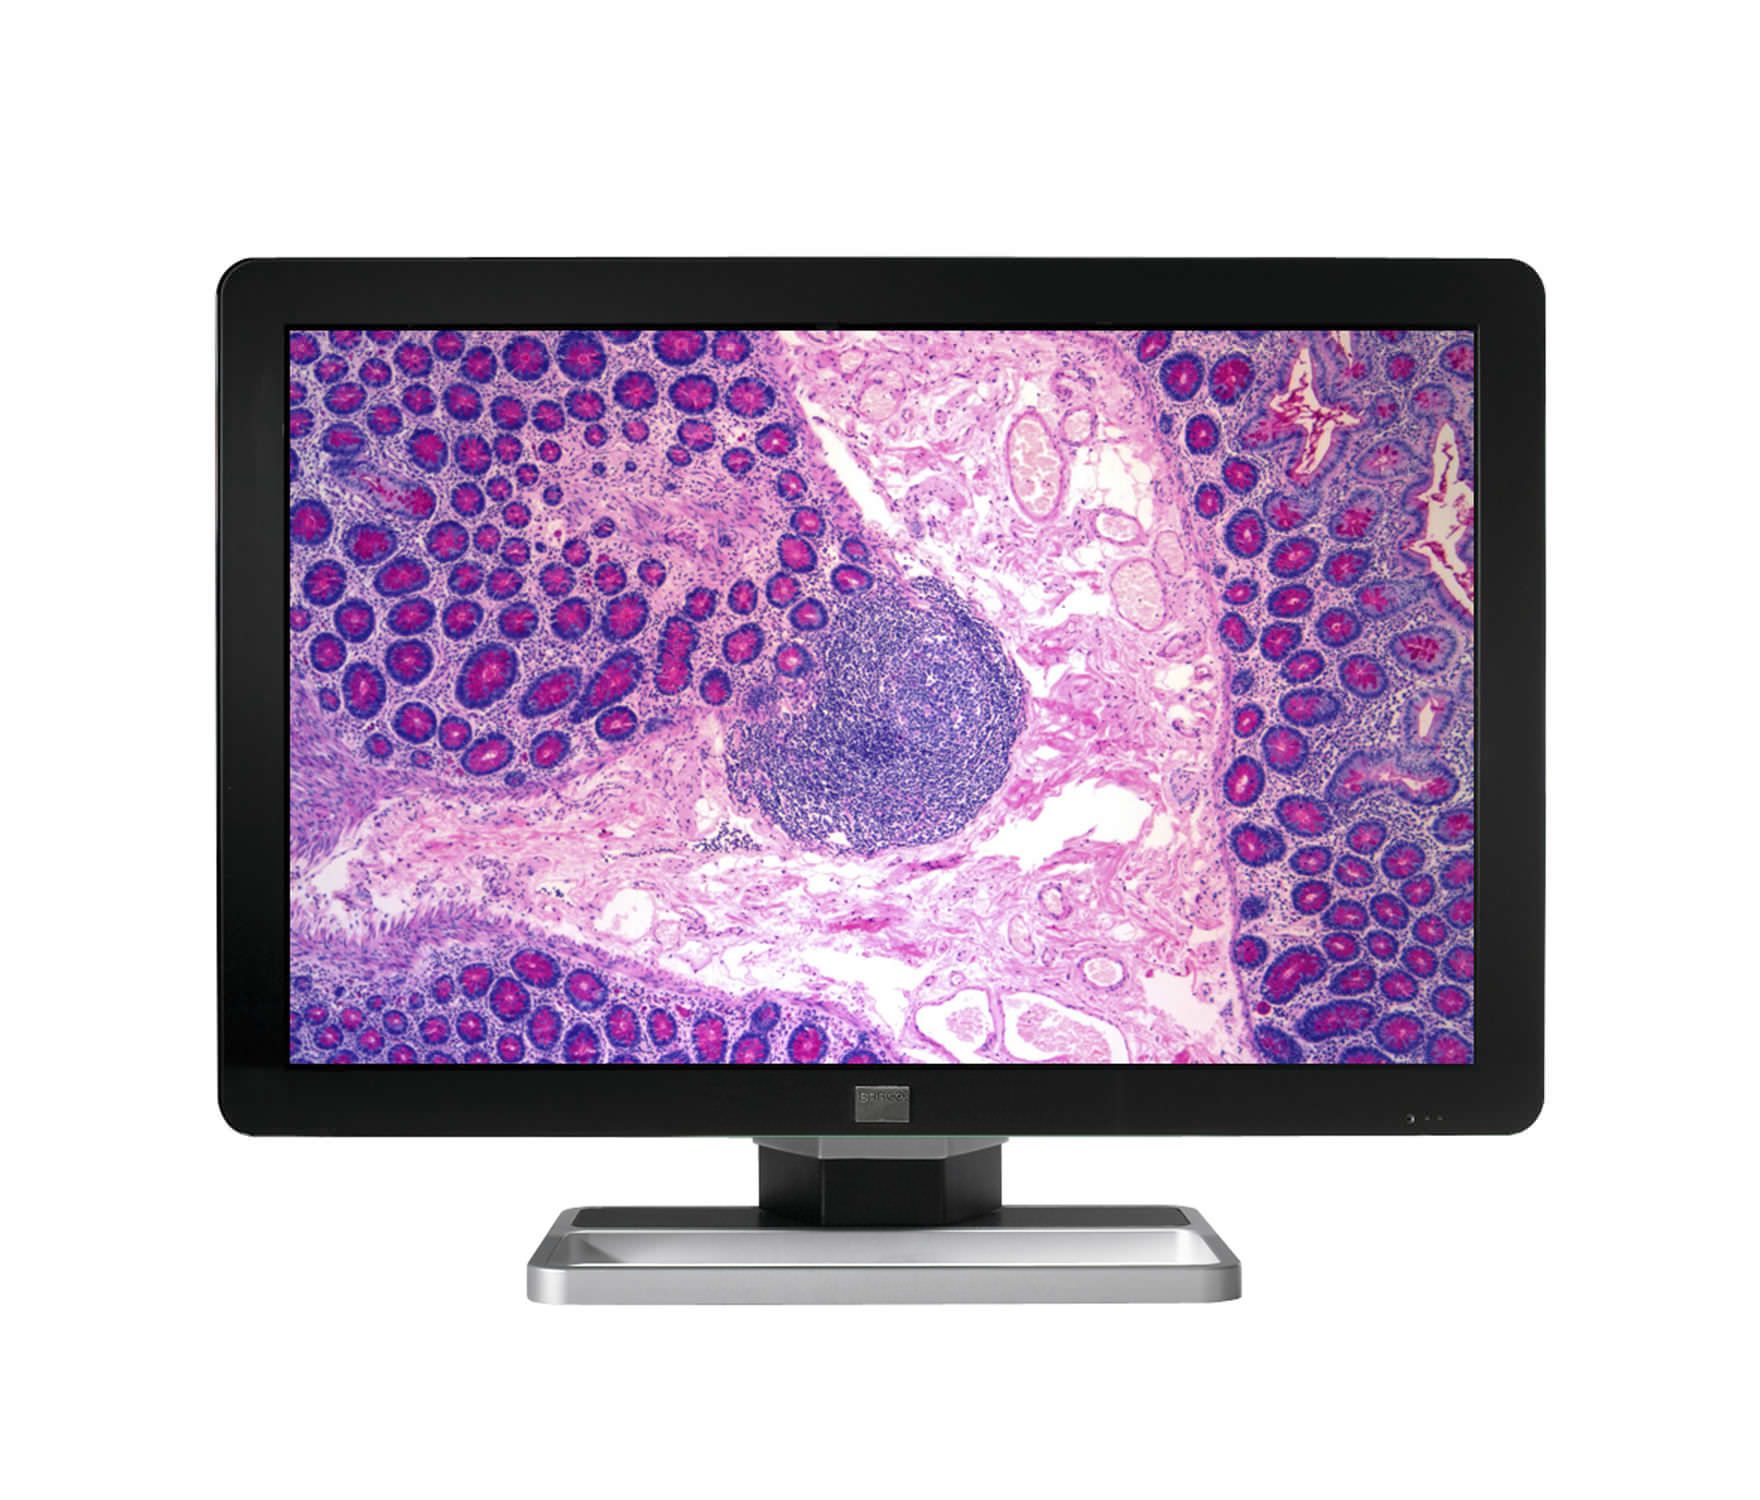 LED display / high-definition / medical 6 MP | Coronis Fusion MDCC-6230 Barco